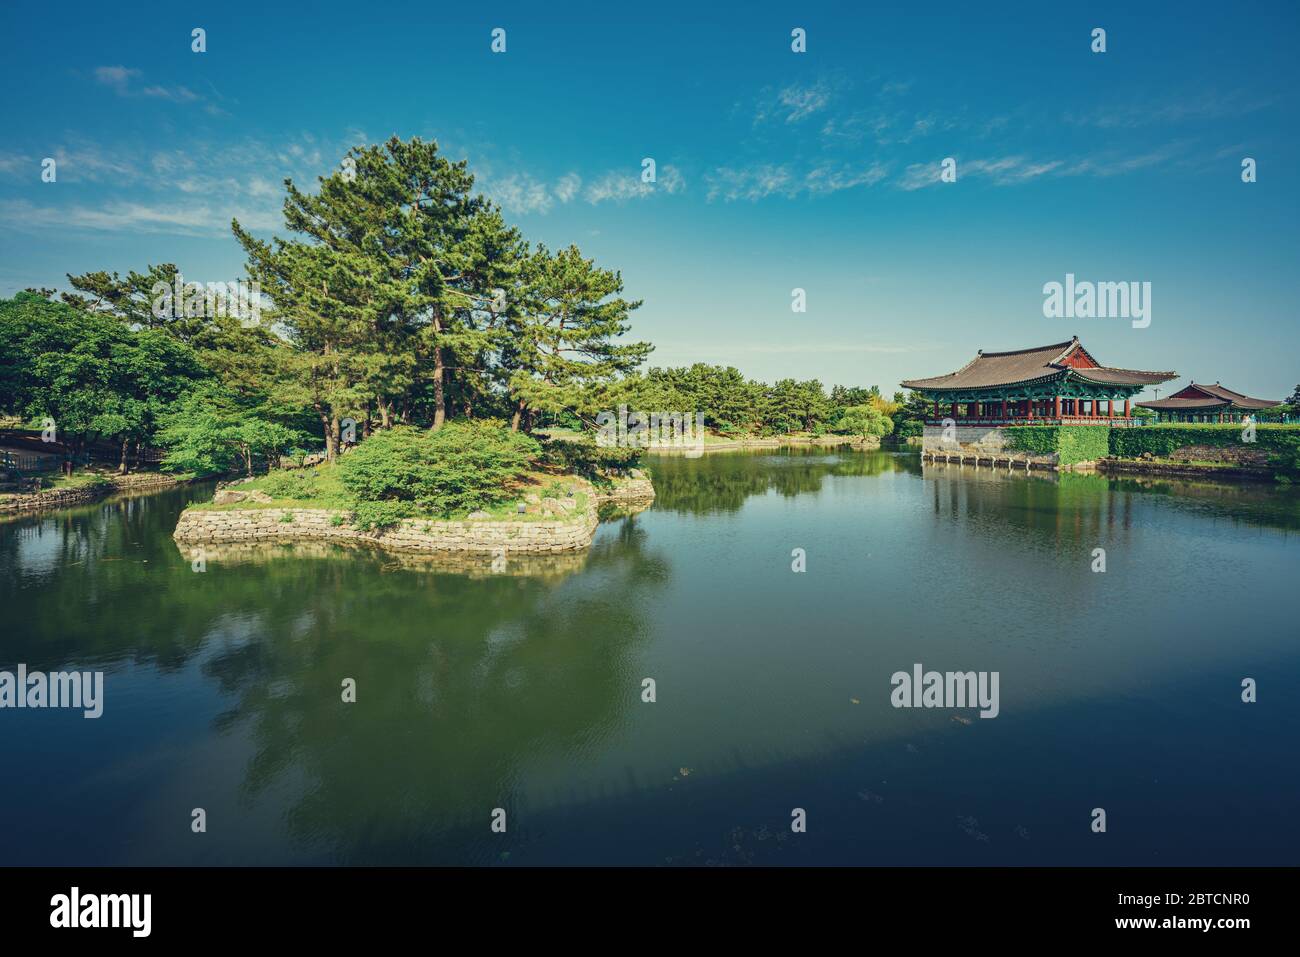 Gyeongju, South Korea - 22 May 2020: Donggung Palace and Wolji Pond, formerly known as Anapji is another popular destination in Gyeongju. Stock Photo